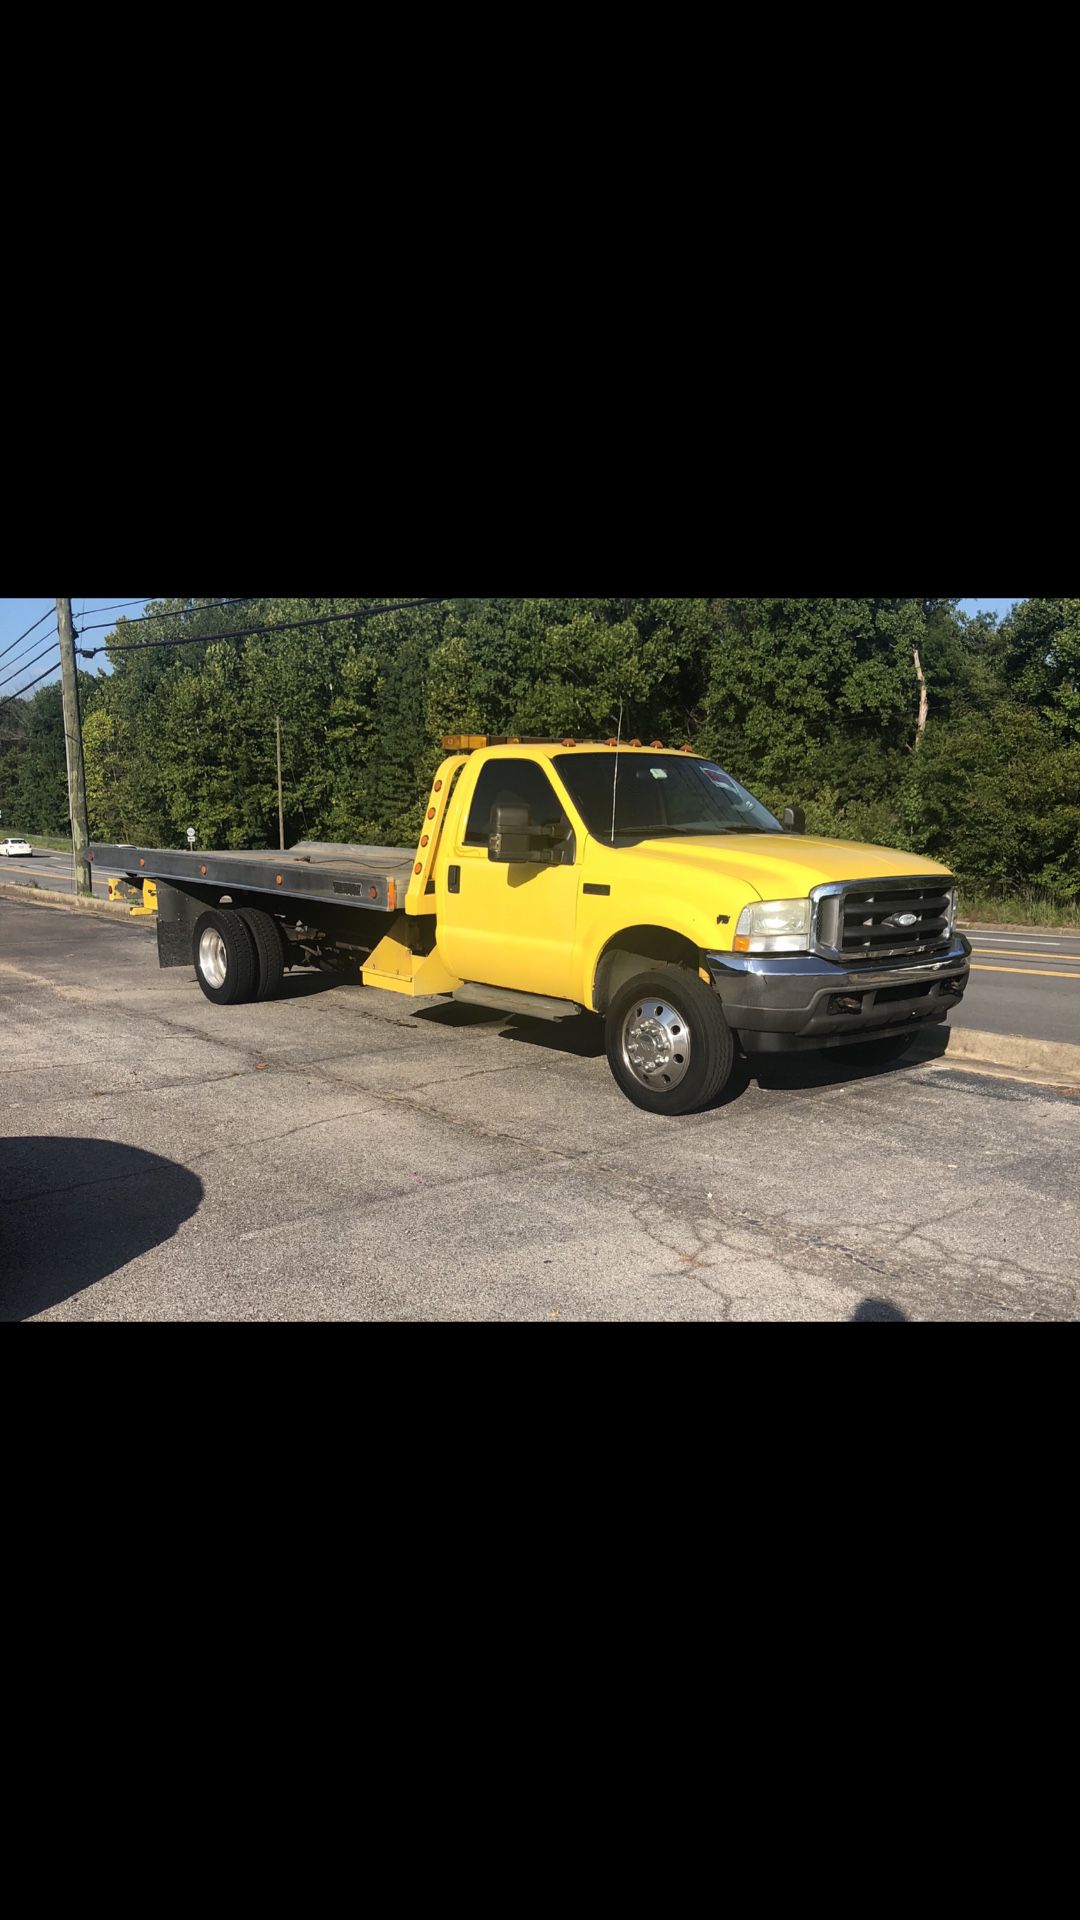 2004 Ford F550 Rollback Tow Truck- Great condition only 132K miles!!!